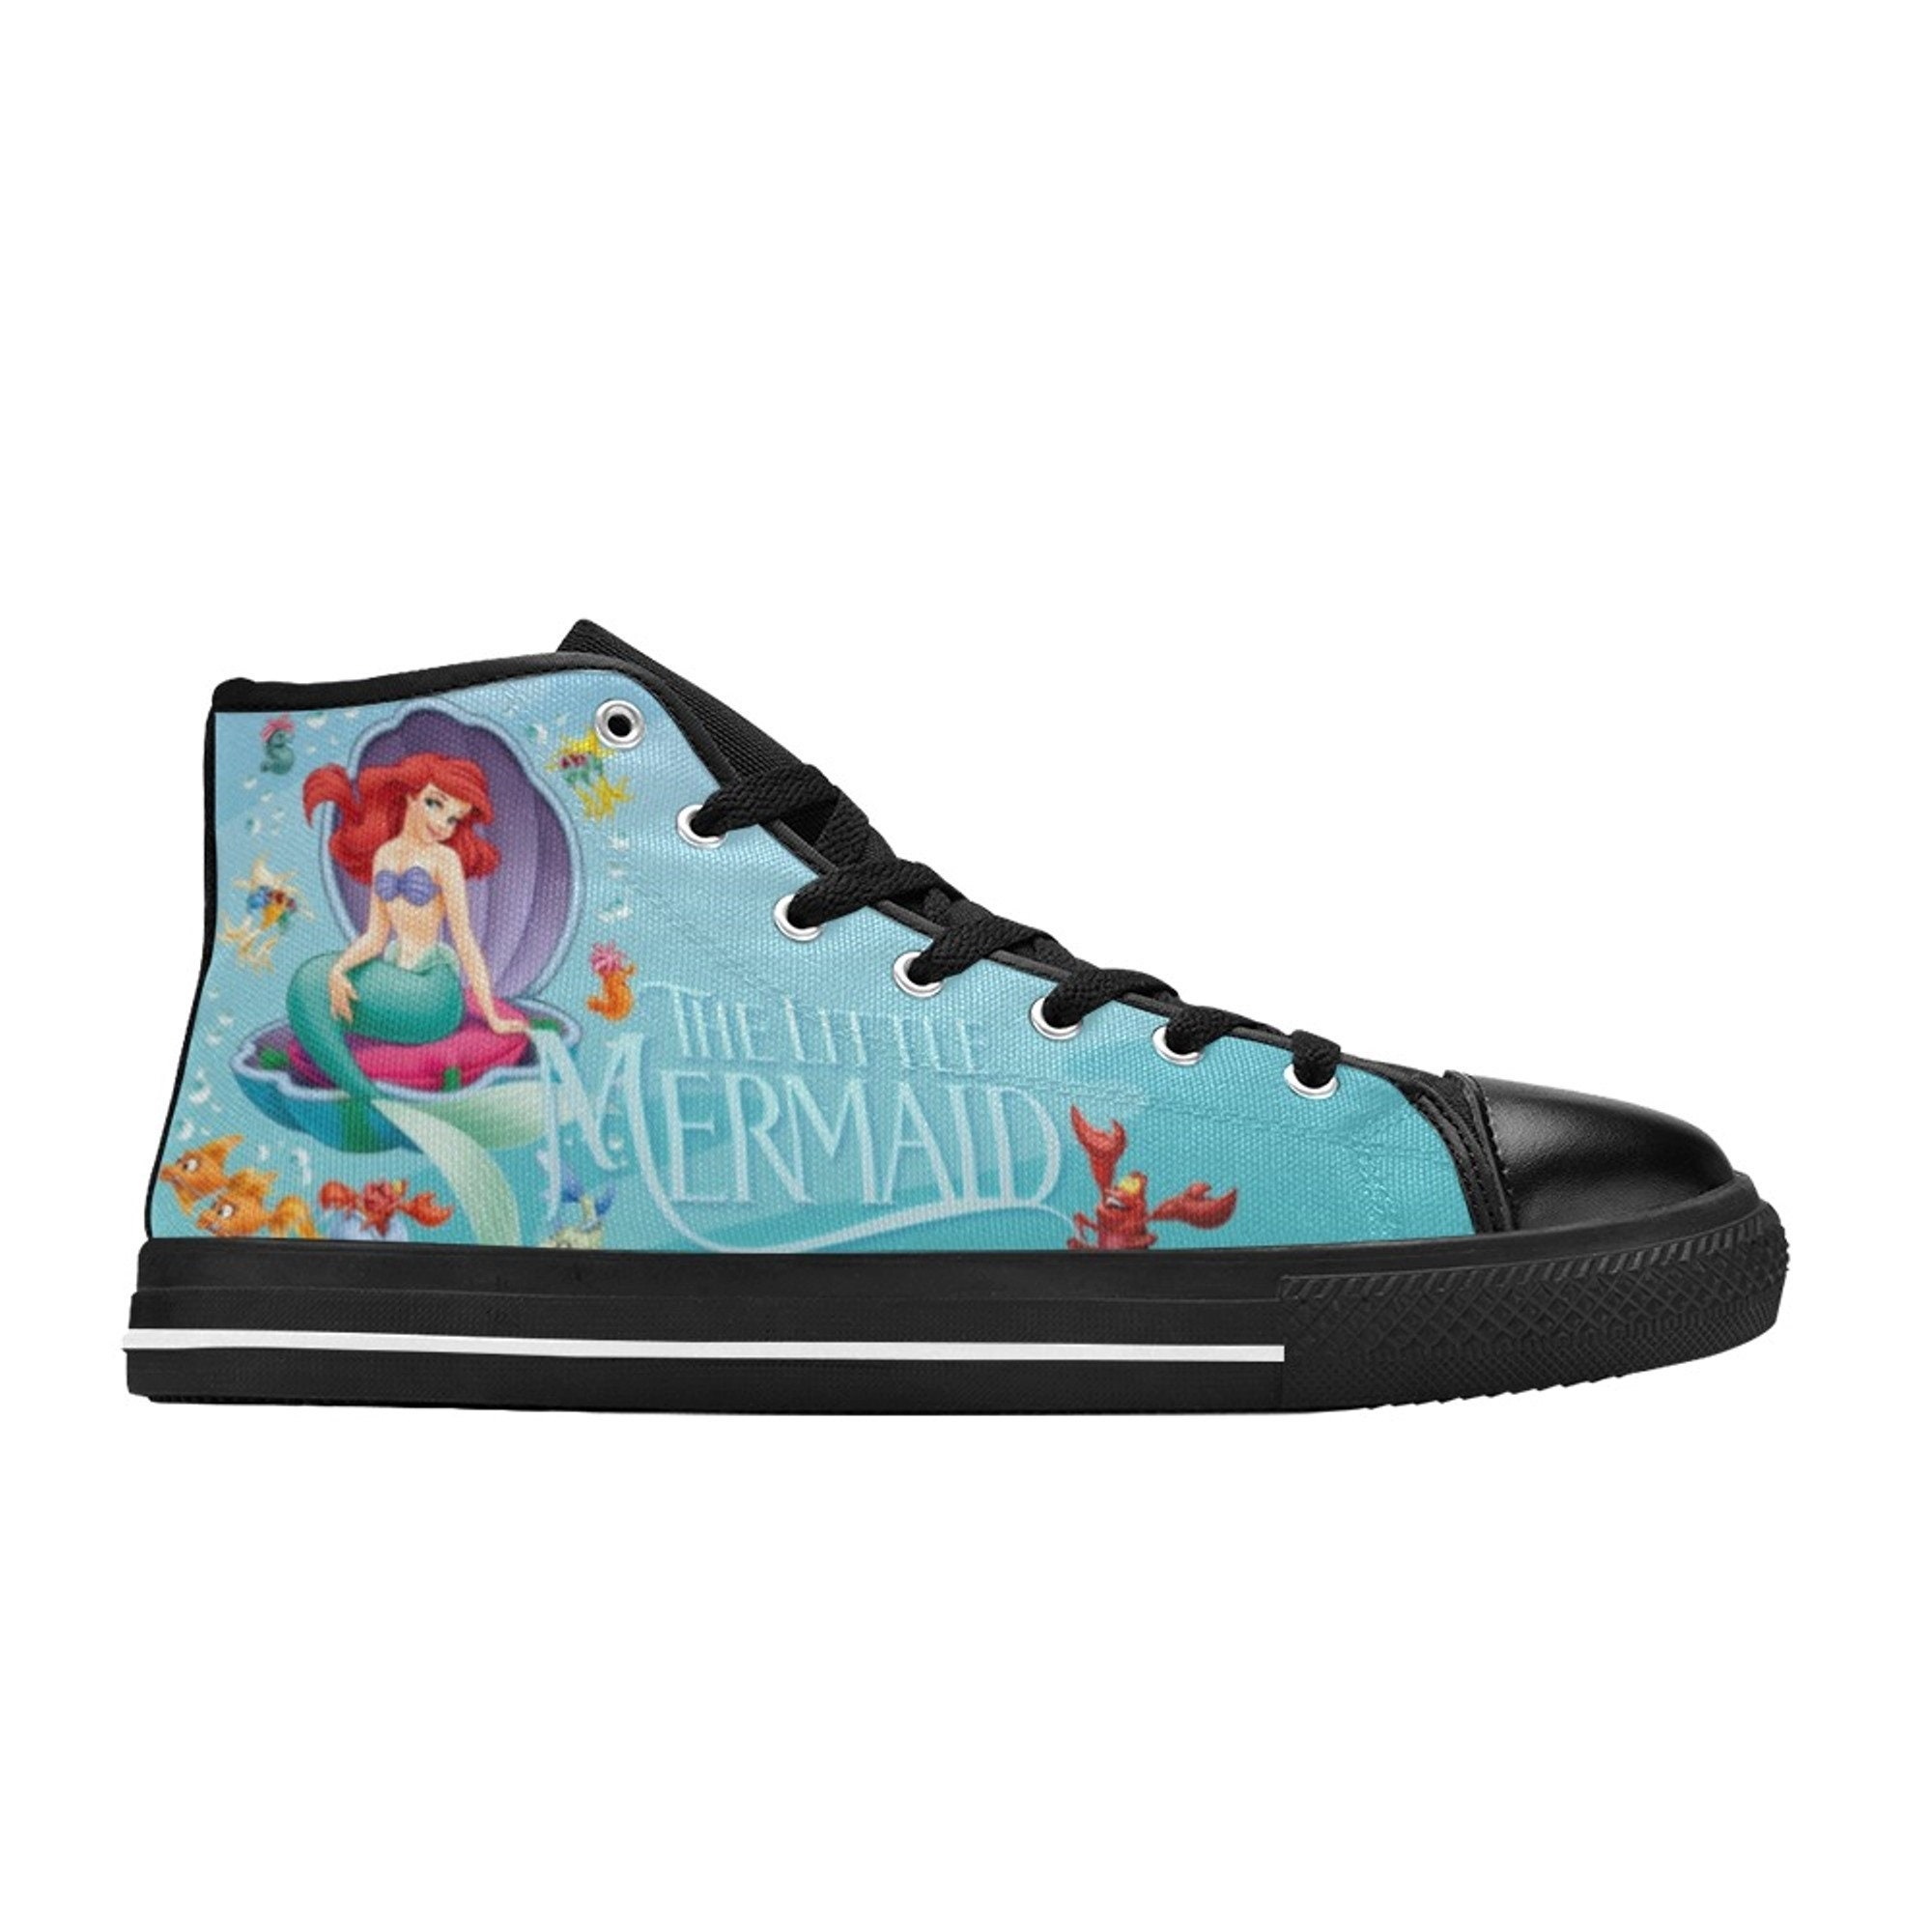 The Little Mermaid Unofficial Shoes Custom Unisex Adult Shoes, Canvas Shoes High Top